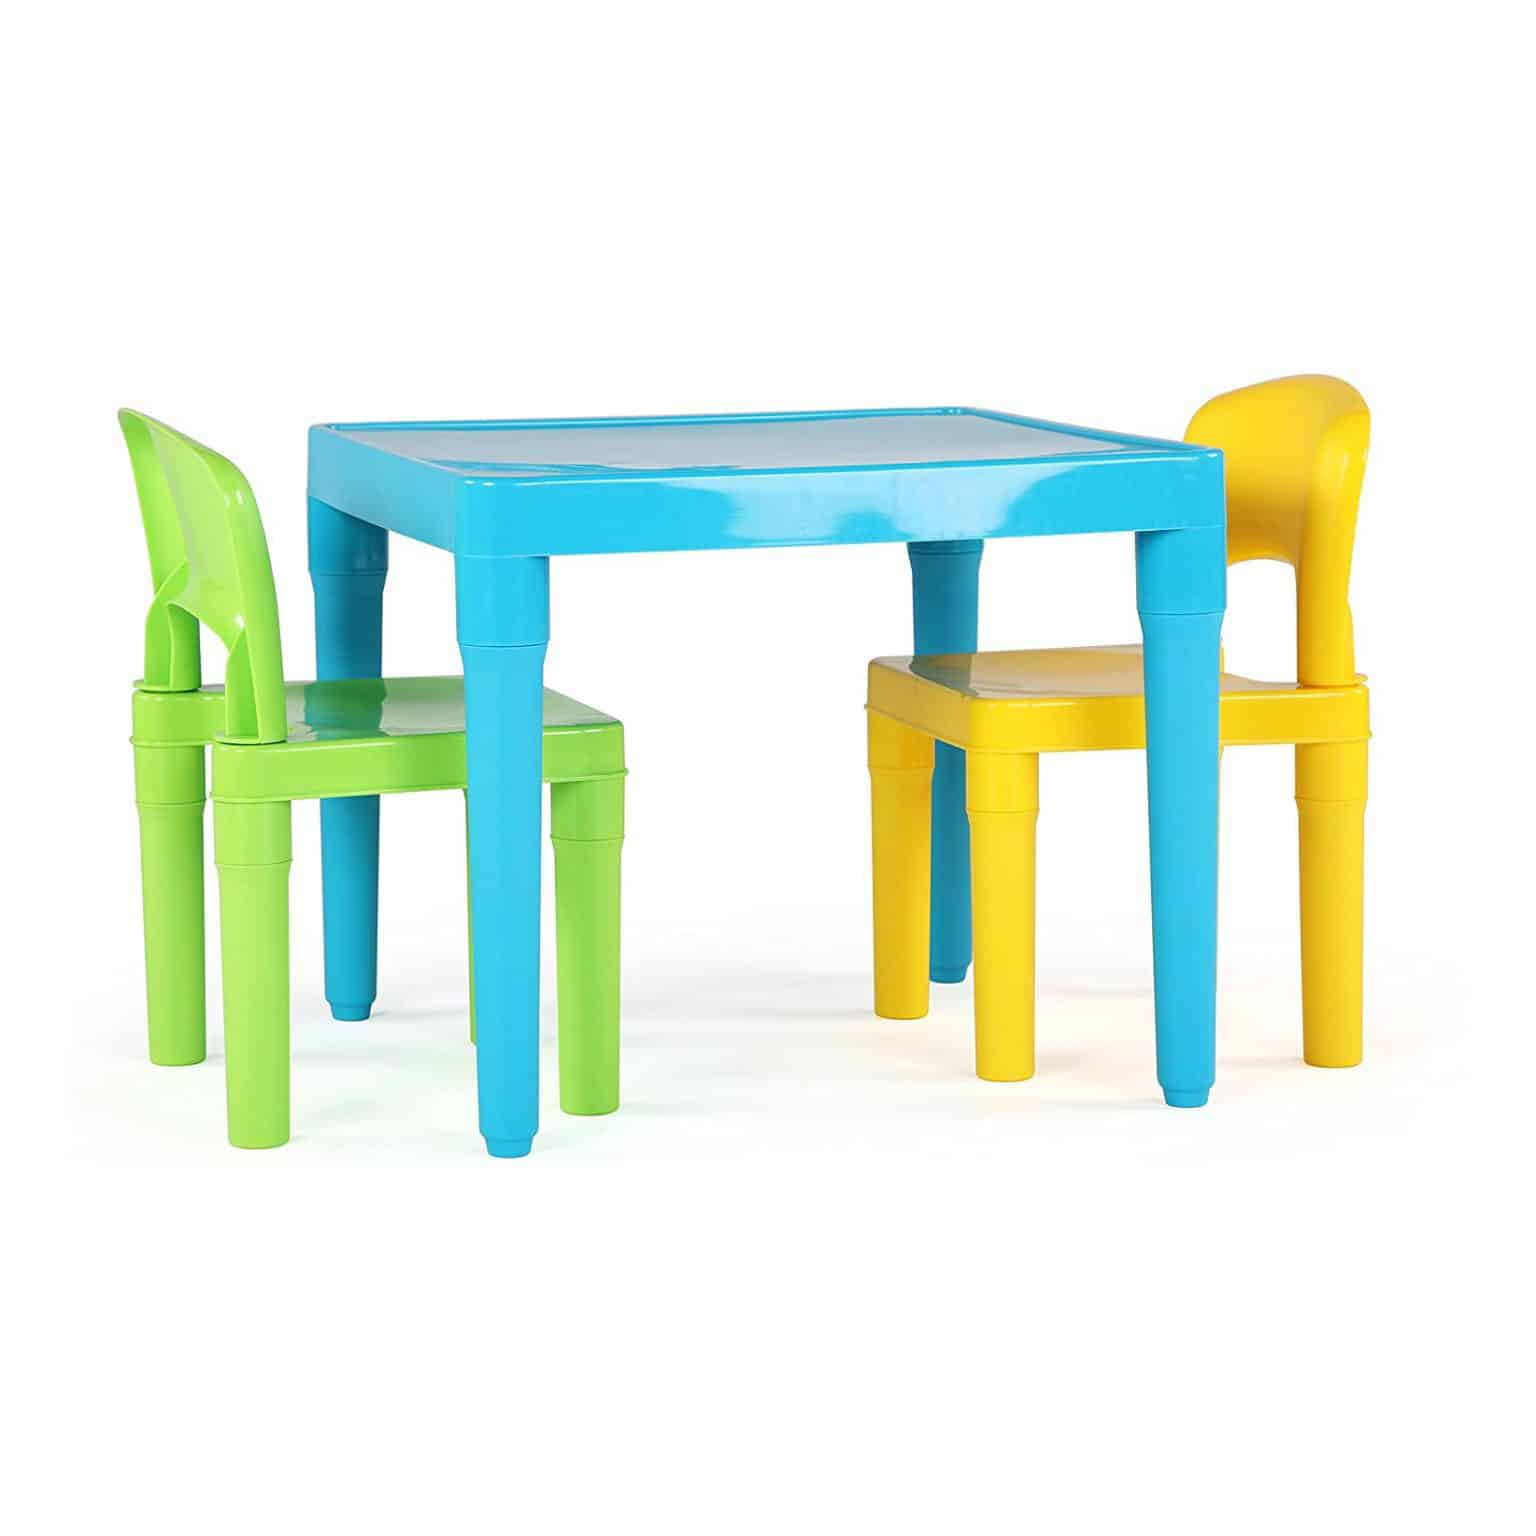 Top 10 Best Toddler Desks and Chairs in 2022 Reviews | Buyer’s Guide